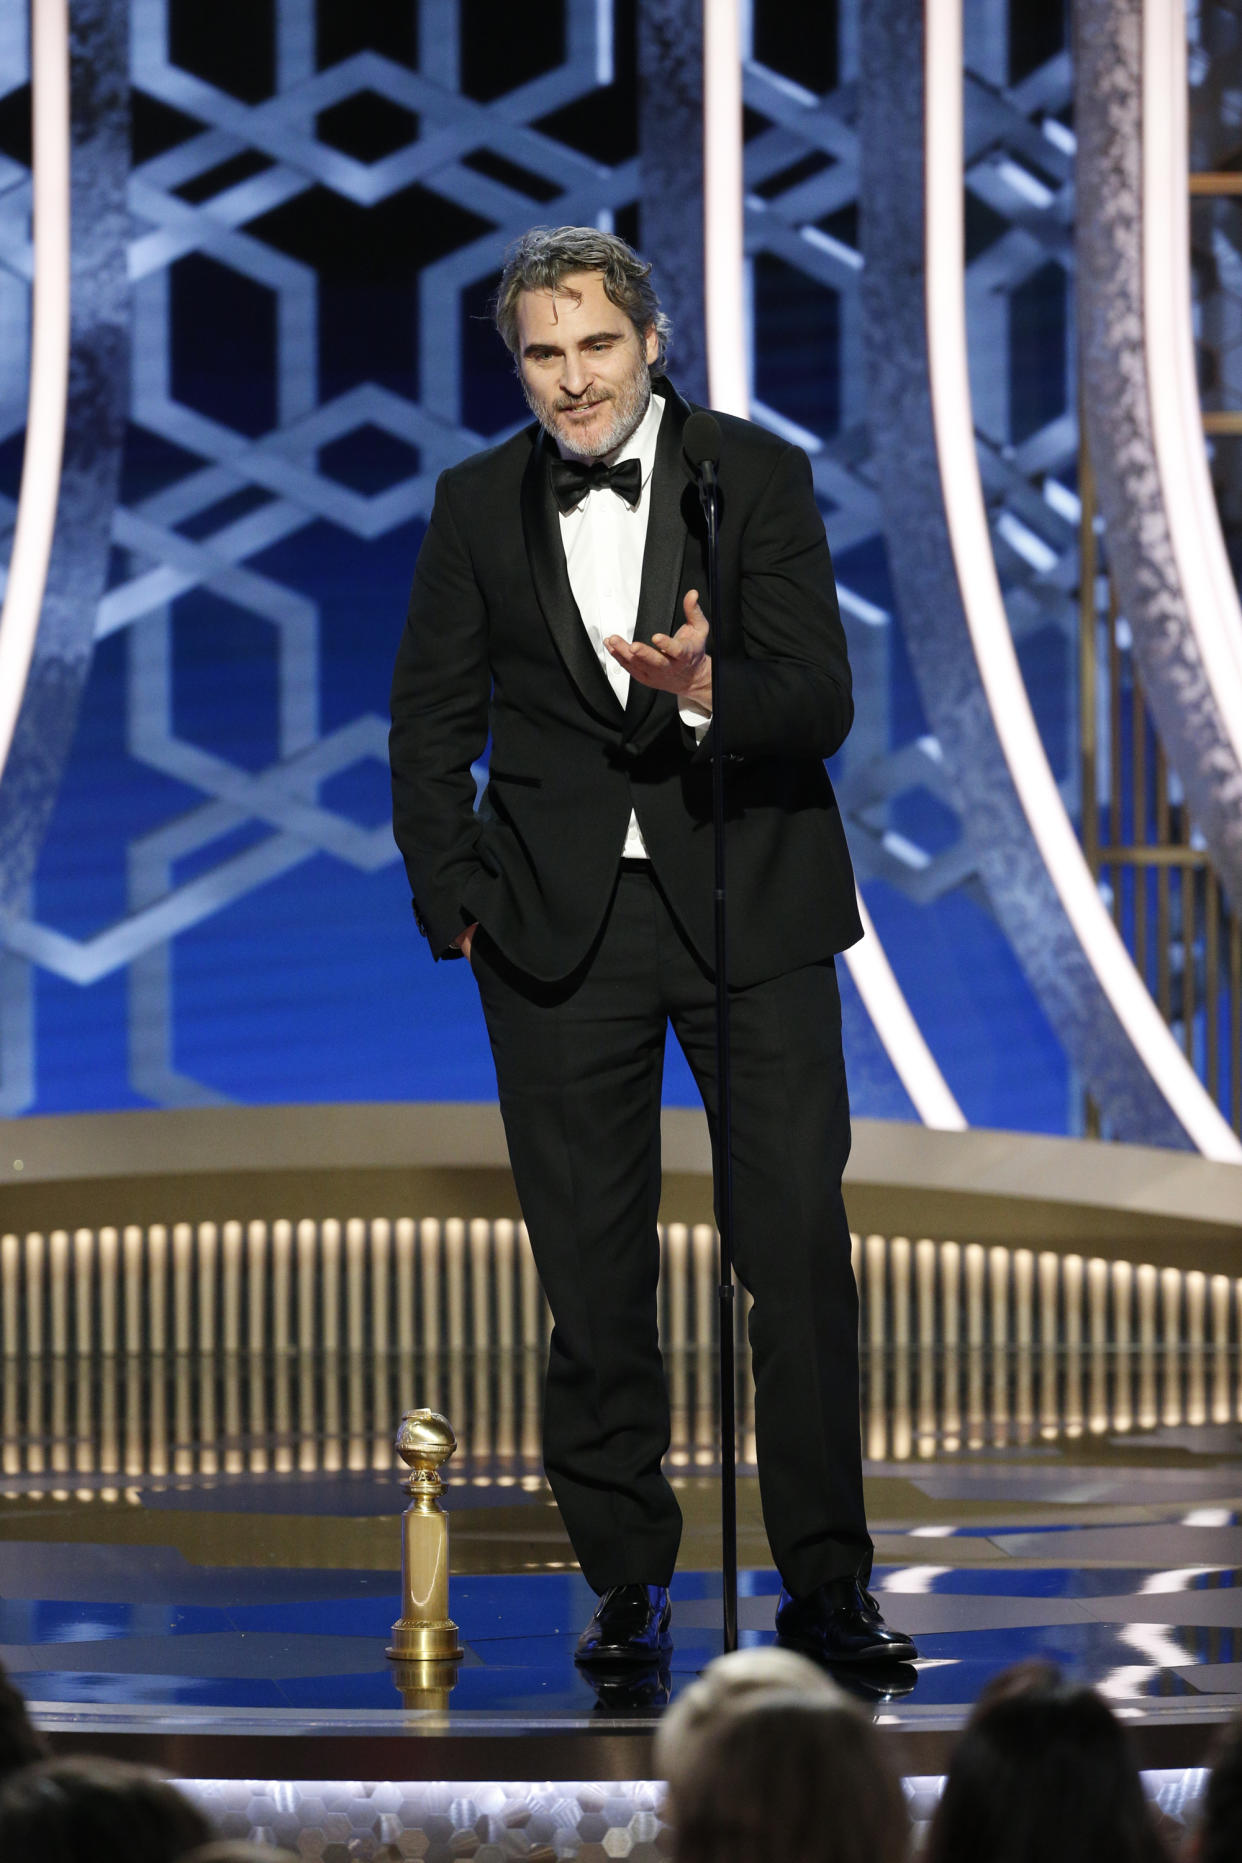 BEVERLY HILLS, CALIFORNIA - JANUARY 05: In this handout photo provided by NBCUniversal Media, LLC,  Joaquin Phoenix accepts the award for BEST PERFORMANCE BY AN ACTOR IN A MOTION PICTURE - DRAMA for "Joker" onstage during the 77th Annual Golden Globe Awards at The Beverly Hilton Hotel on January 5, 2020 in Beverly Hills, California. (Photo by Paul Drinkwater/NBCUniversal Media, LLC via Getty Images)